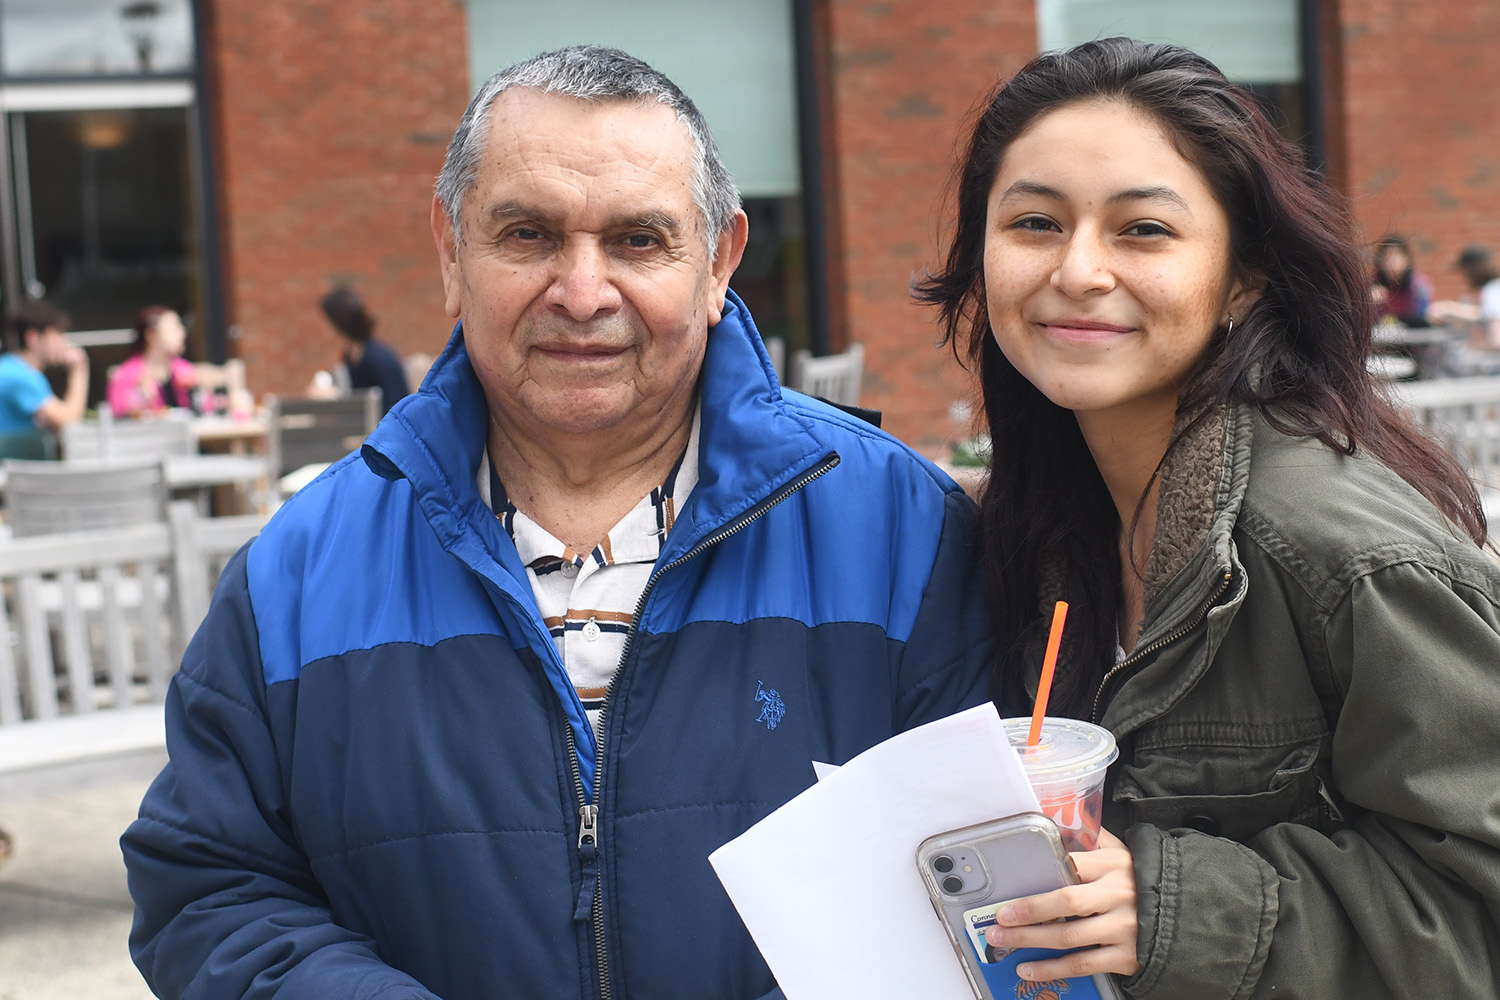 Ainhoa Murchan '26 attended WesFest with her grandfather, Carlos